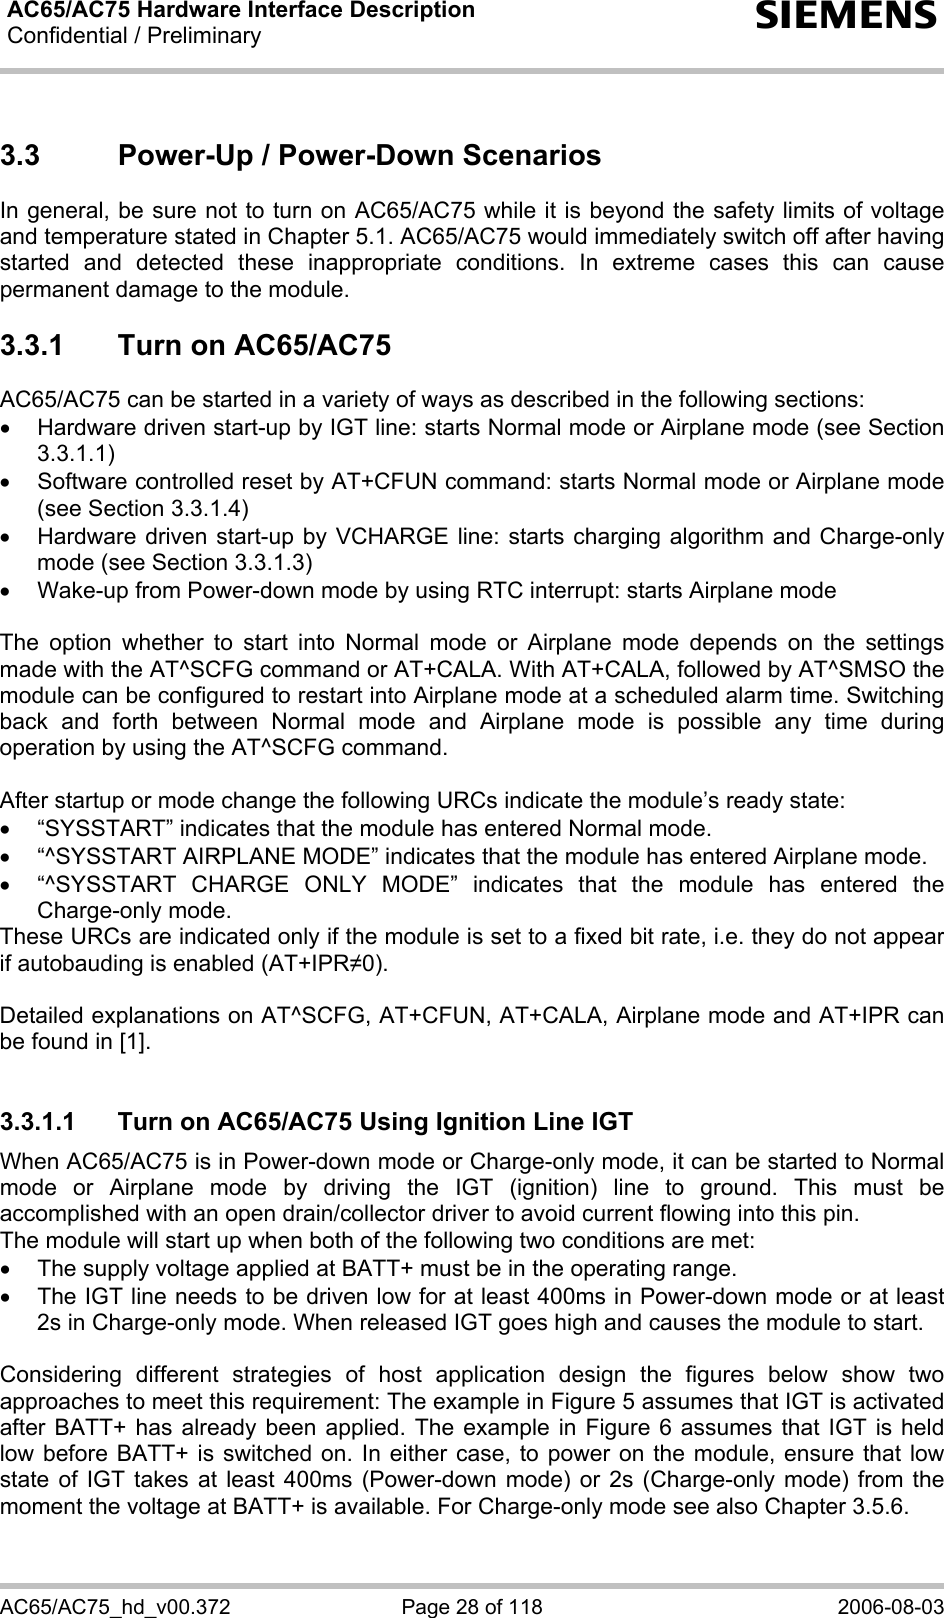 AC65/AC75 Hardware Interface Description Confidential / Preliminary  s AC65/AC75_hd_v00.372  Page 28 of 118  2006-08-03 3.3  Power-Up / Power-Down Scenarios In general, be sure not to turn on AC65/AC75 while it is beyond the safety limits of voltage and temperature stated in Chapter 5.1. AC65/AC75 would immediately switch off after having started and detected these inappropriate conditions. In extreme cases this can cause permanent damage to the module.  3.3.1  Turn on AC65/AC75 AC65/AC75 can be started in a variety of ways as described in the following sections: •  Hardware driven start-up by IGT line: starts Normal mode or Airplane mode (see Section 3.3.1.1) •  Software controlled reset by AT+CFUN command: starts Normal mode or Airplane mode (see Section 3.3.1.4) •  Hardware driven start-up by VCHARGE line: starts charging algorithm and Charge-only mode (see Section 3.3.1.3) •  Wake-up from Power-down mode by using RTC interrupt: starts Airplane mode  The option whether to start into Normal mode or Airplane mode depends on the settings made with the AT^SCFG command or AT+CALA. With AT+CALA, followed by AT^SMSO the module can be configured to restart into Airplane mode at a scheduled alarm time. Switching back and forth between Normal mode and Airplane mode is possible any time during operation by using the AT^SCFG command.   After startup or mode change the following URCs indicate the module’s ready state: •  “SYSSTART” indicates that the module has entered Normal mode. •  “^SYSSTART AIRPLANE MODE” indicates that the module has entered Airplane mode. •  “^SYSSTART CHARGE ONLY MODE” indicates that the module has entered the Charge-only mode. These URCs are indicated only if the module is set to a fixed bit rate, i.e. they do not appear if autobauding is enabled (AT+IPR0).  Detailed explanations on AT^SCFG, AT+CFUN, AT+CALA, Airplane mode and AT+IPR can be found in [1].  3.3.1.1  Turn on AC65/AC75 Using Ignition Line IGT When AC65/AC75 is in Power-down mode or Charge-only mode, it can be started to Normal mode or Airplane mode by driving the IGT (ignition) line to ground. This must be accomplished with an open drain/collector driver to avoid current flowing into this pin.  The module will start up when both of the following two conditions are met:  •  The supply voltage applied at BATT+ must be in the operating range.  •  The IGT line needs to be driven low for at least 400ms in Power-down mode or at least 2s in Charge-only mode. When released IGT goes high and causes the module to start.  Considering different strategies of host application design the figures below show two approaches to meet this requirement: The example in Figure 5 assumes that IGT is activated after BATT+ has already been applied. The example in Figure 6 assumes that IGT is held low before BATT+ is switched on. In either case, to power on the module, ensure that low state of IGT takes at least 400ms (Power-down mode) or 2s (Charge-only mode) from the moment the voltage at BATT+ is available. For Charge-only mode see also Chapter 3.5.6. 